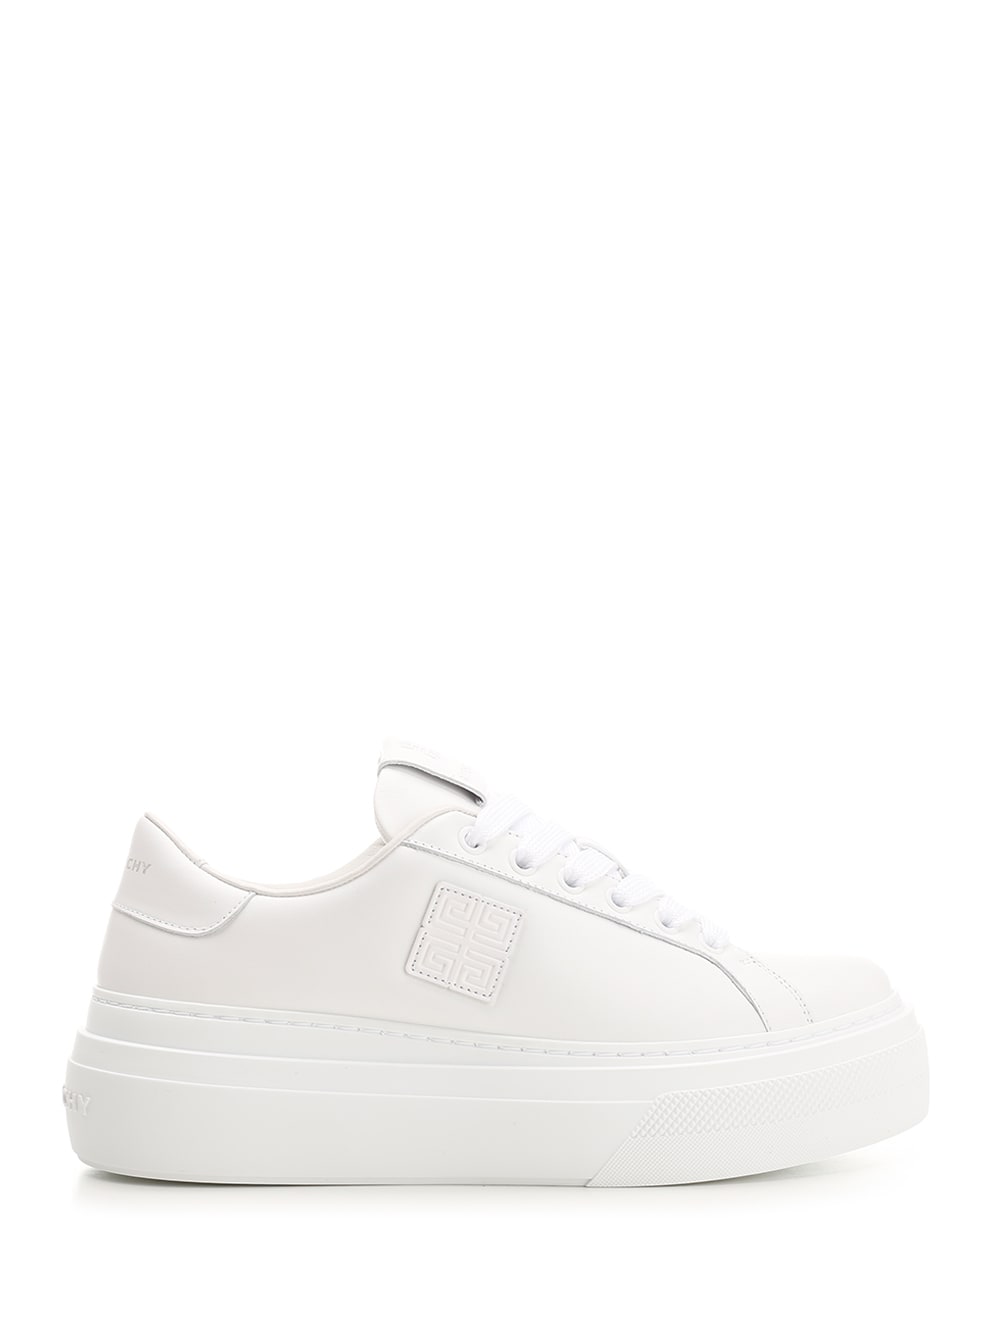 Shop Givenchy Sneaker City